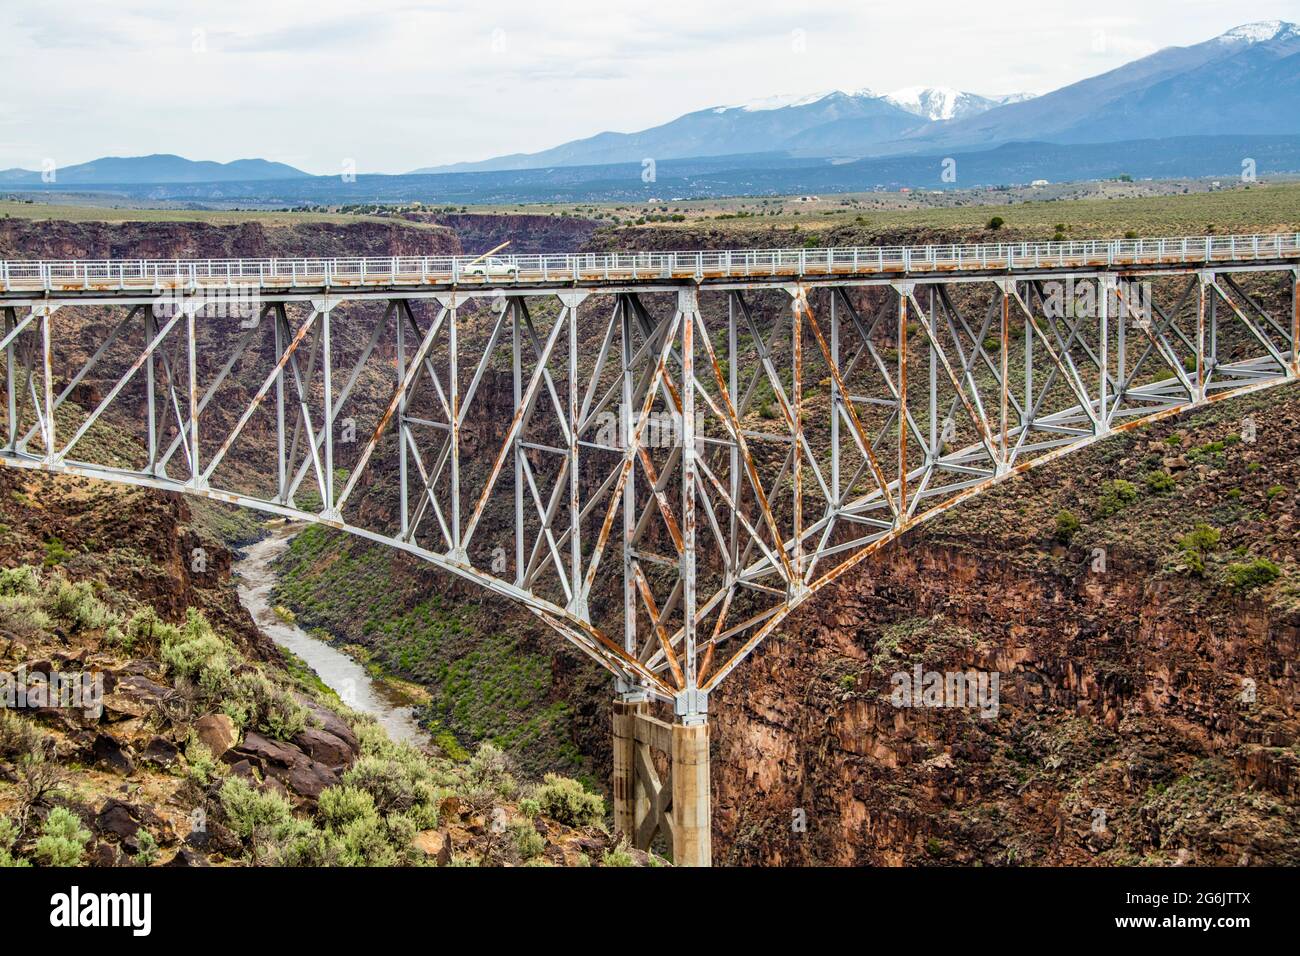 The Rio Grande Gorge Bridge A Steel Deck Arch Bridge Across The Rio Grande Gorge 10 Miles Northwest Of Taos Nm United States The Tenth Highest Brid Stock Photo Alamy